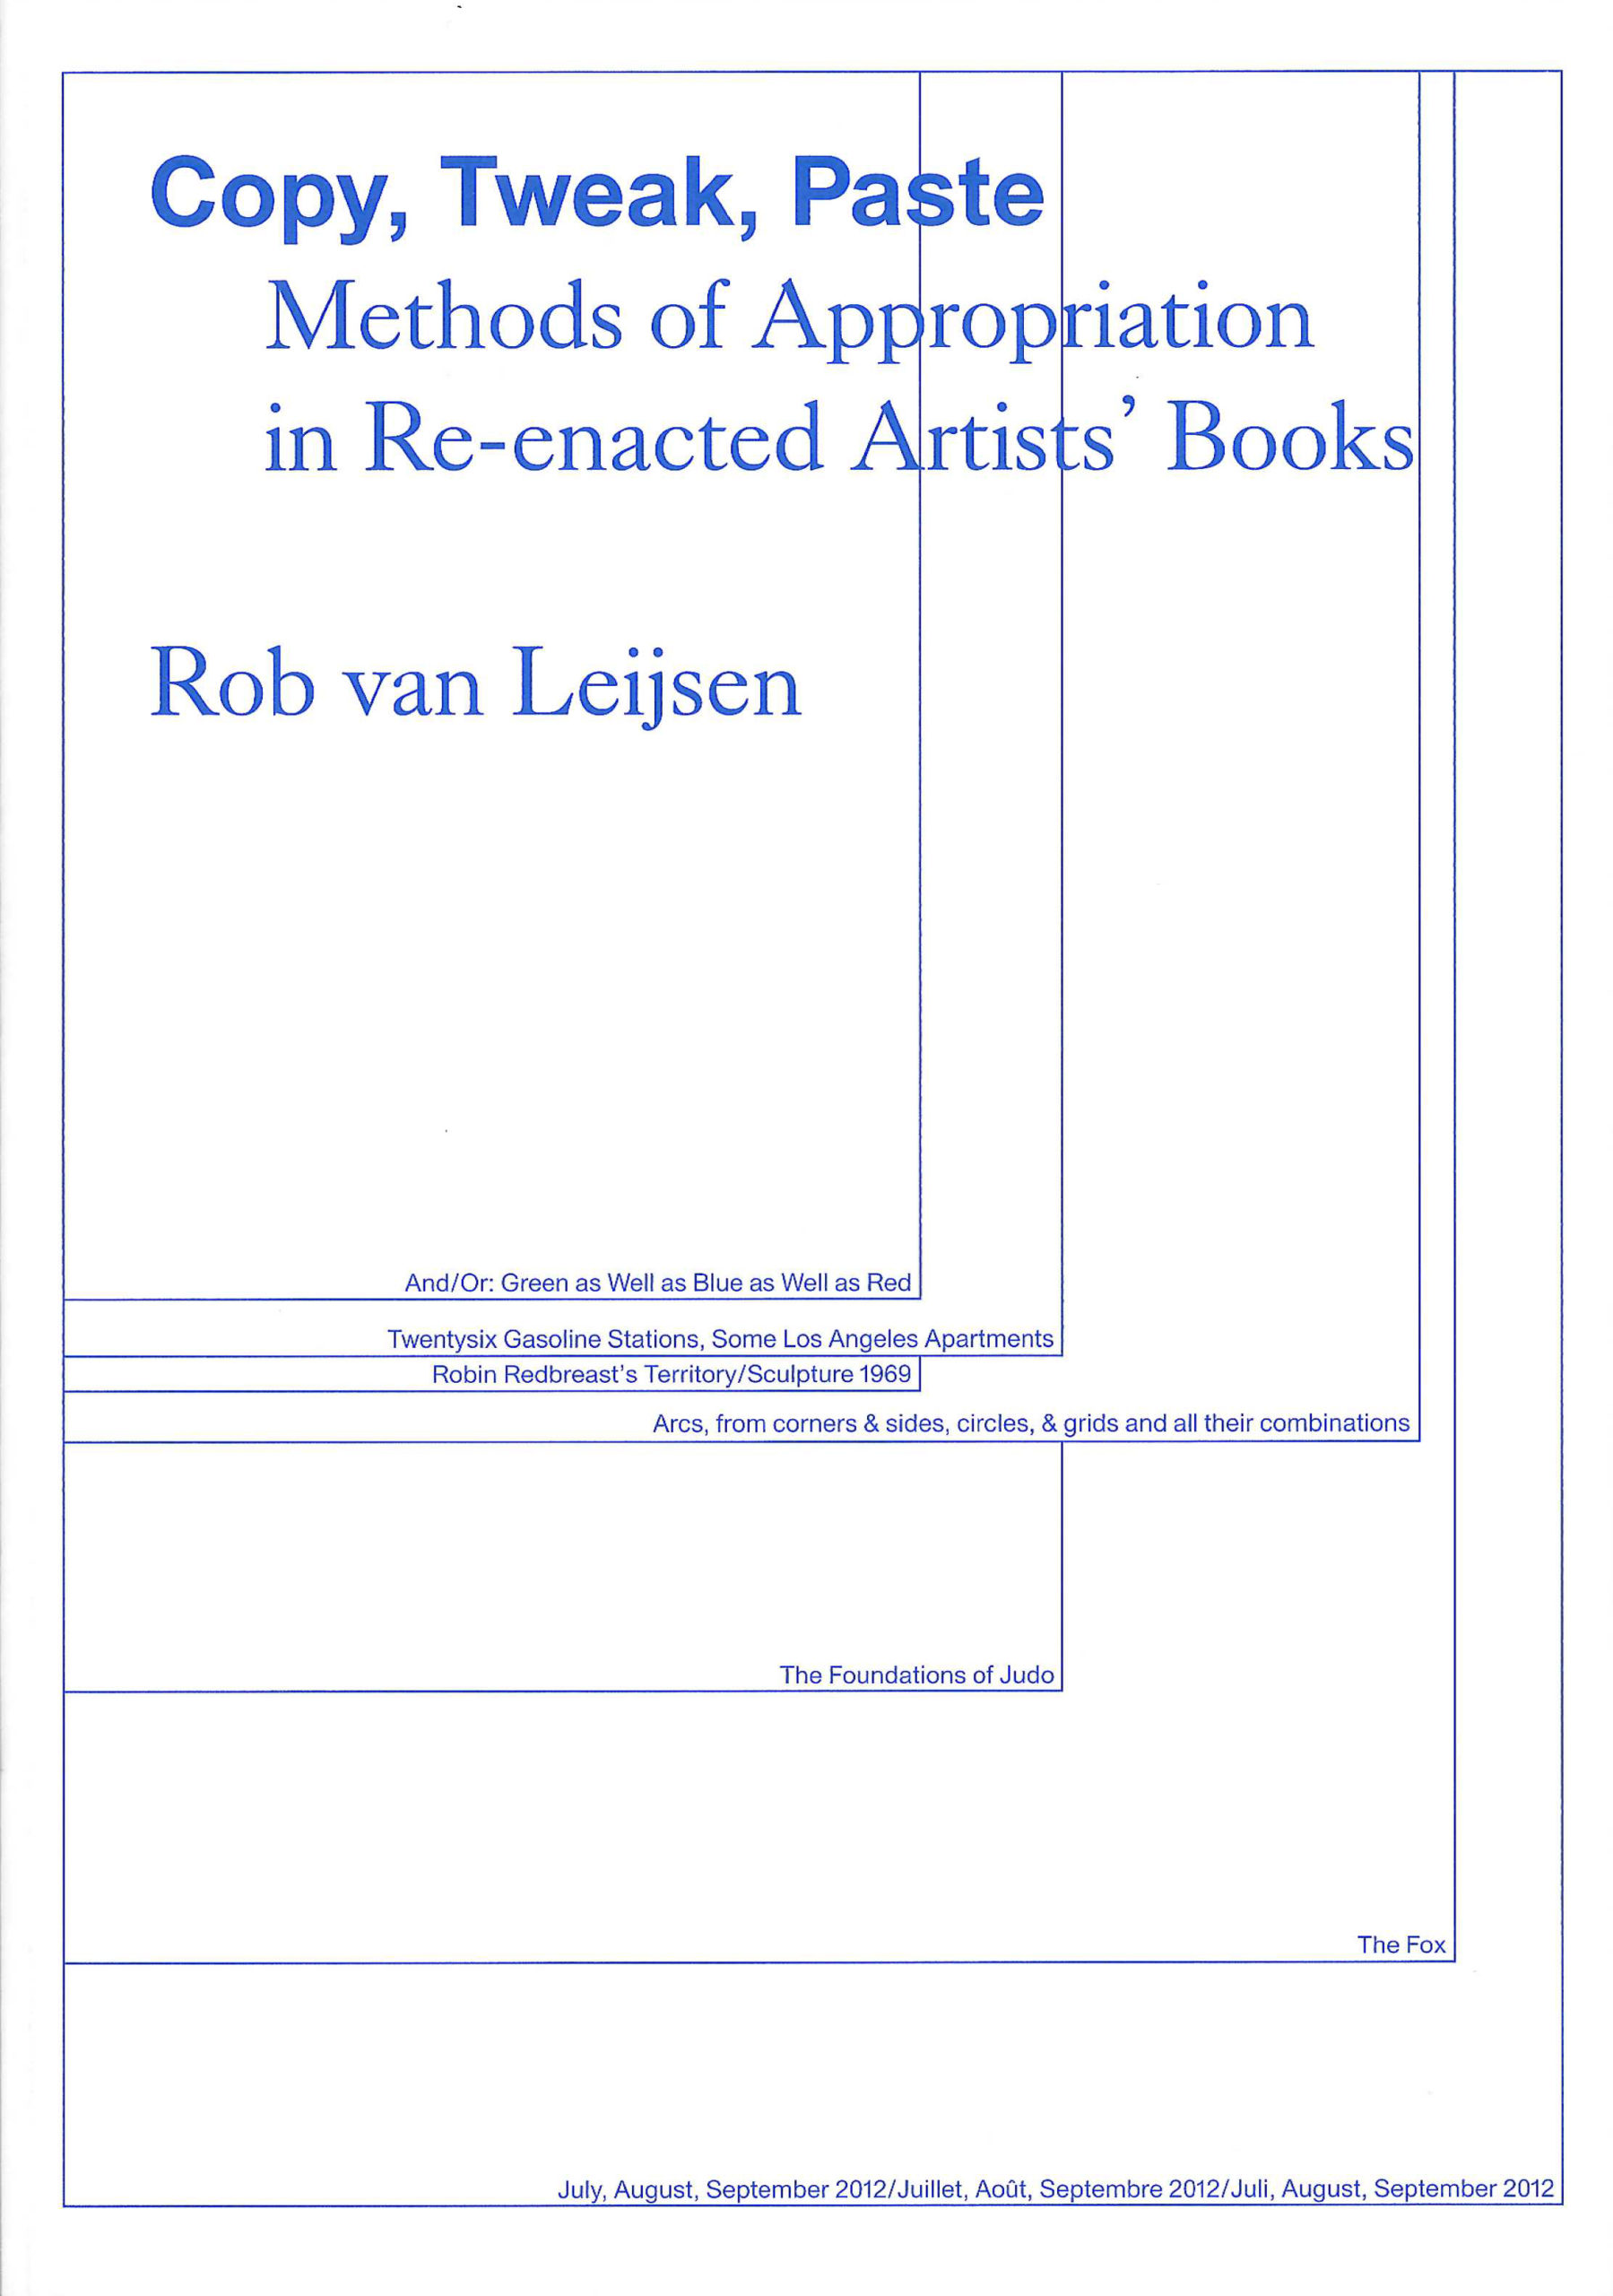 white book cover with blue text